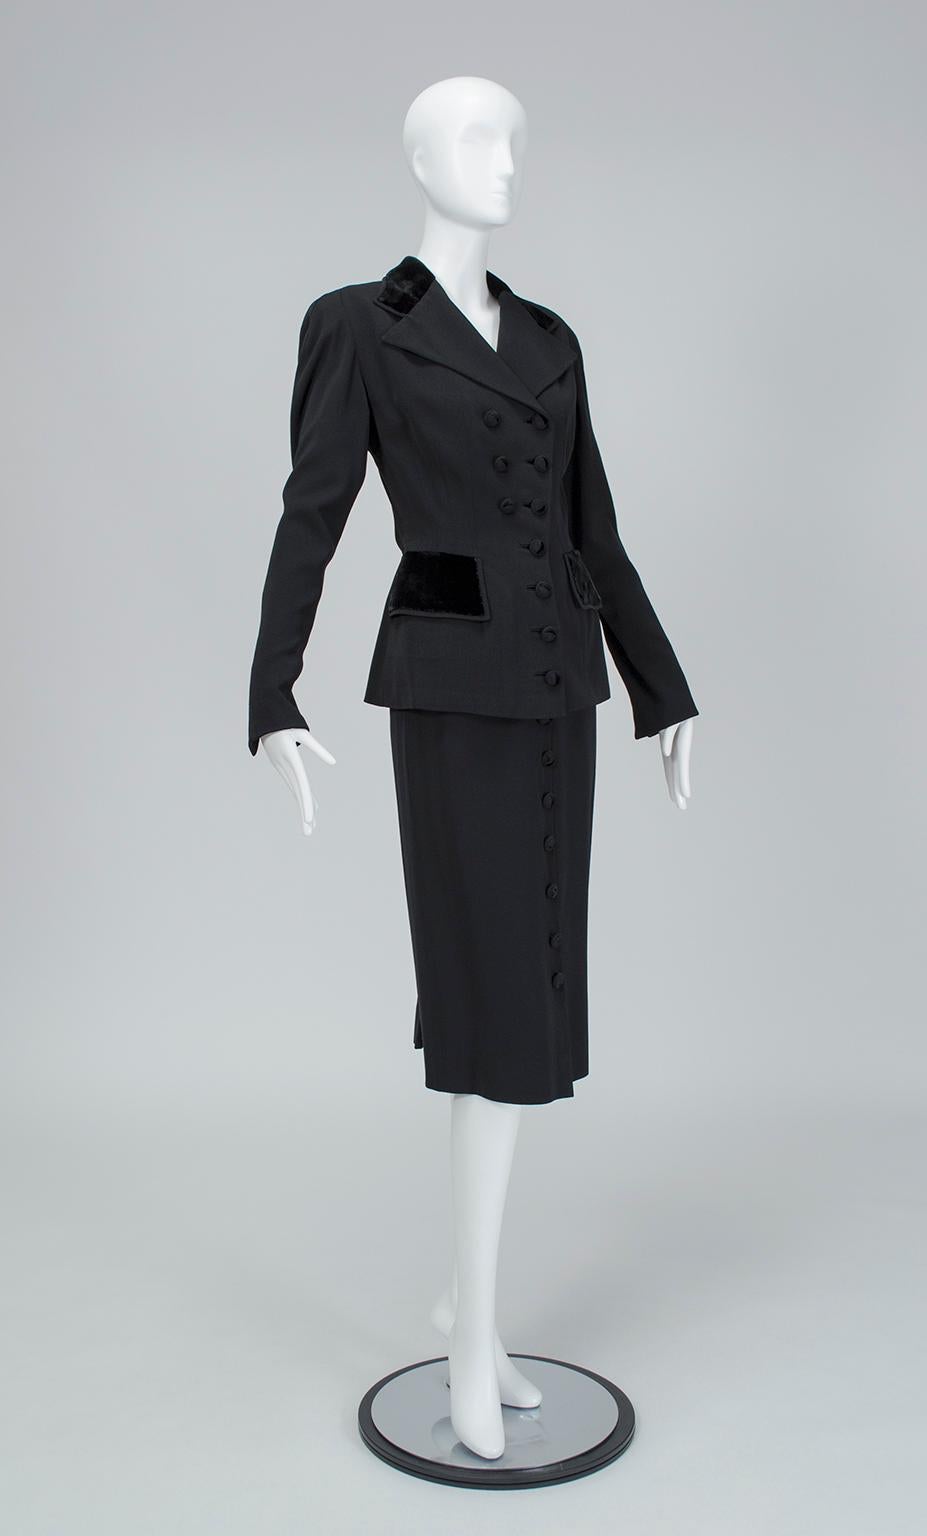 With its double breasted jacket, below-the-knee skirt, scads of buttons and velvet details, this suit is the epitome of the 